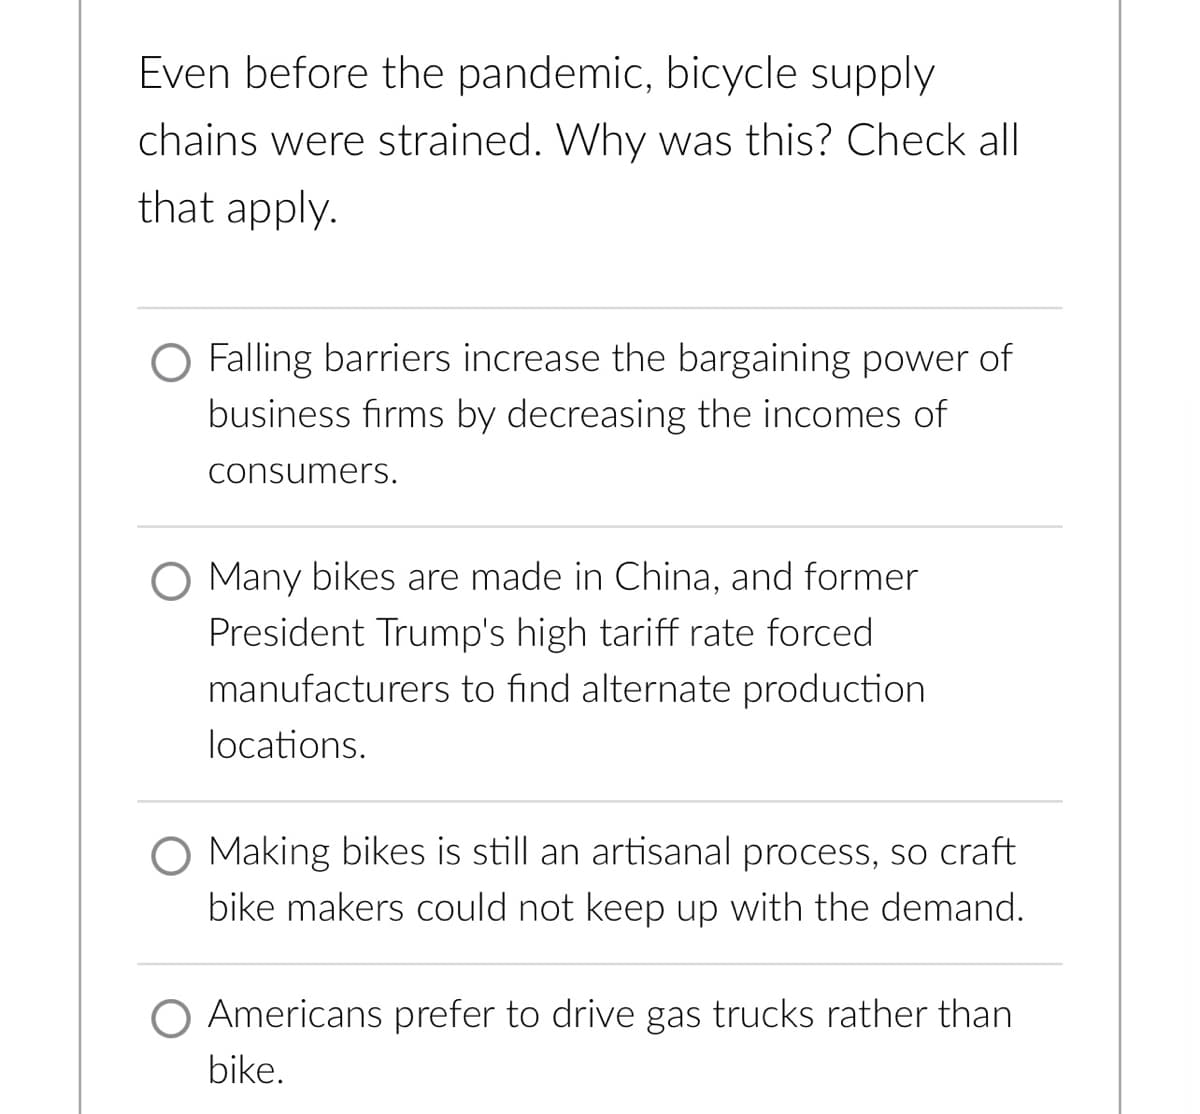 Even before the pandemic, bicycle supply
chains were strained. Why was this? Check all
that apply.
Falling barriers increase the bargaining power of
business firms by decreasing the incomes of
consumers.
Many bikes are made in China, and former
President Trump's high tariff rate forced
manufacturers to find alternate production
locations.
O Making bikes is still an artisanal process, so craft
bike makers could not keep up with the demand.
Americans prefer to drive gas trucks rather than
bike.